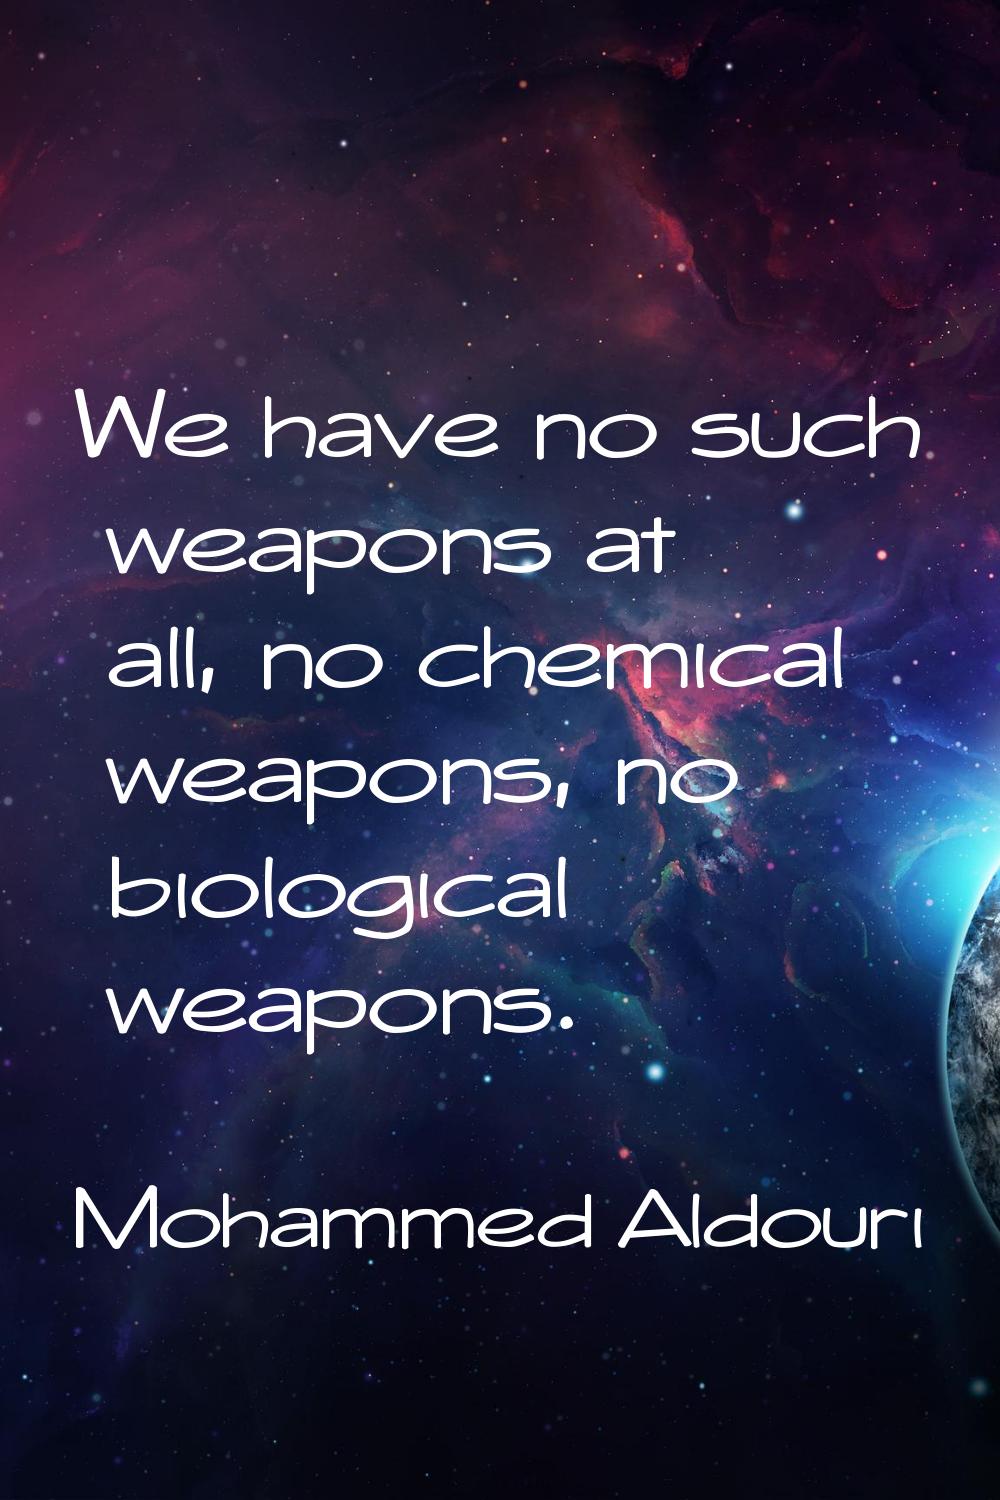 We have no such weapons at all, no chemical weapons, no biological weapons.